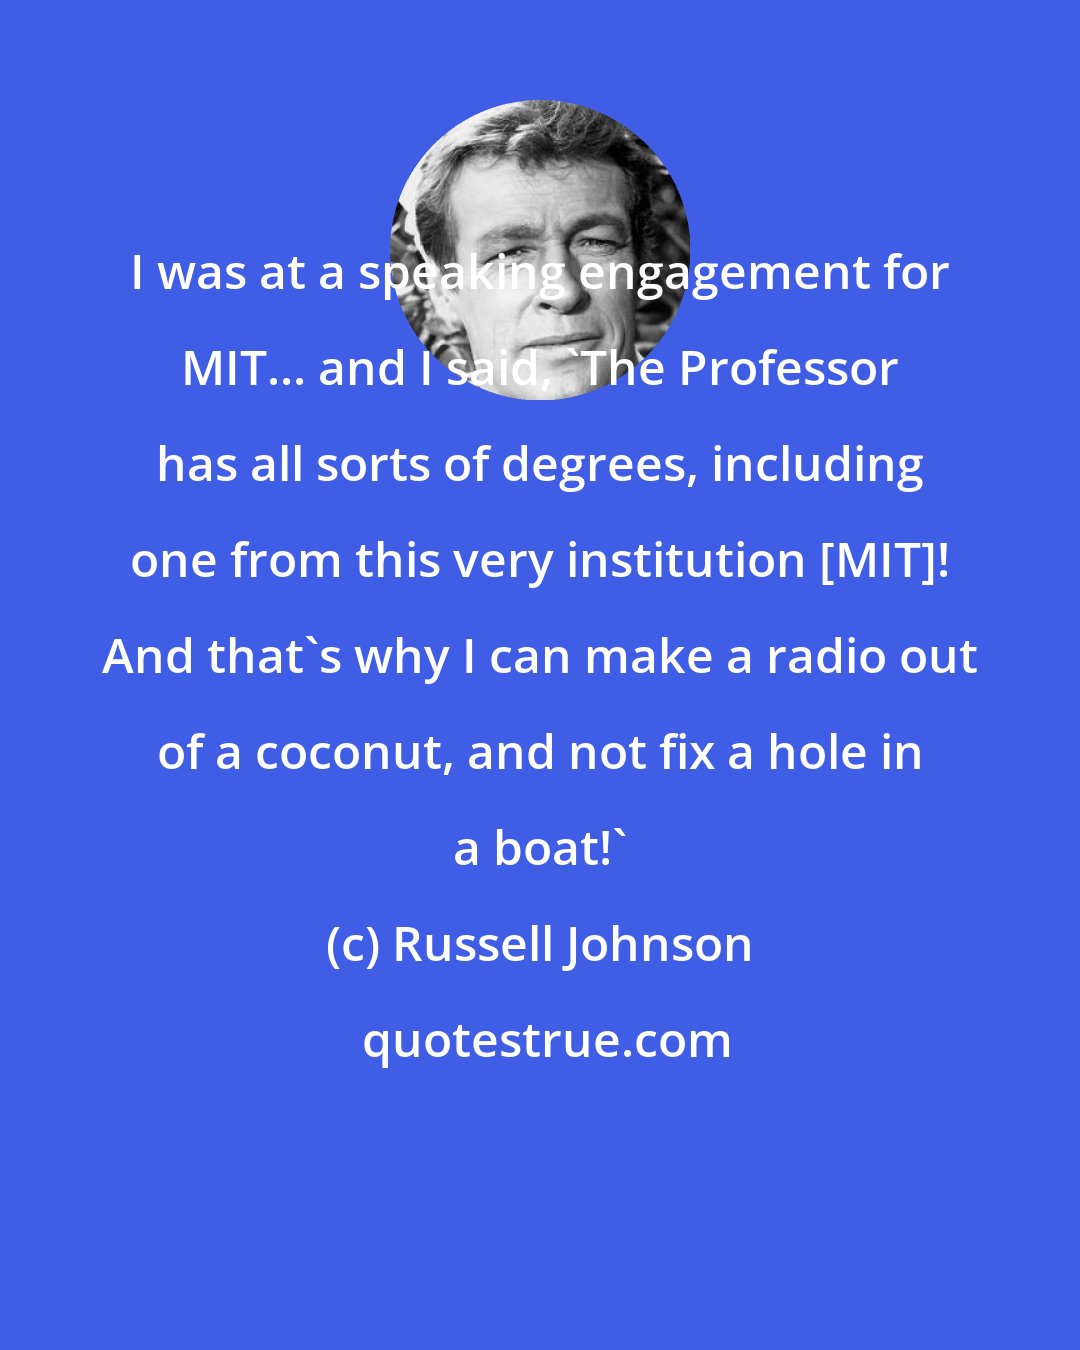 Russell Johnson: I was at a speaking engagement for MIT... and I said, 'The Professor has all sorts of degrees, including one from this very institution [MIT]! And that's why I can make a radio out of a coconut, and not fix a hole in a boat!'